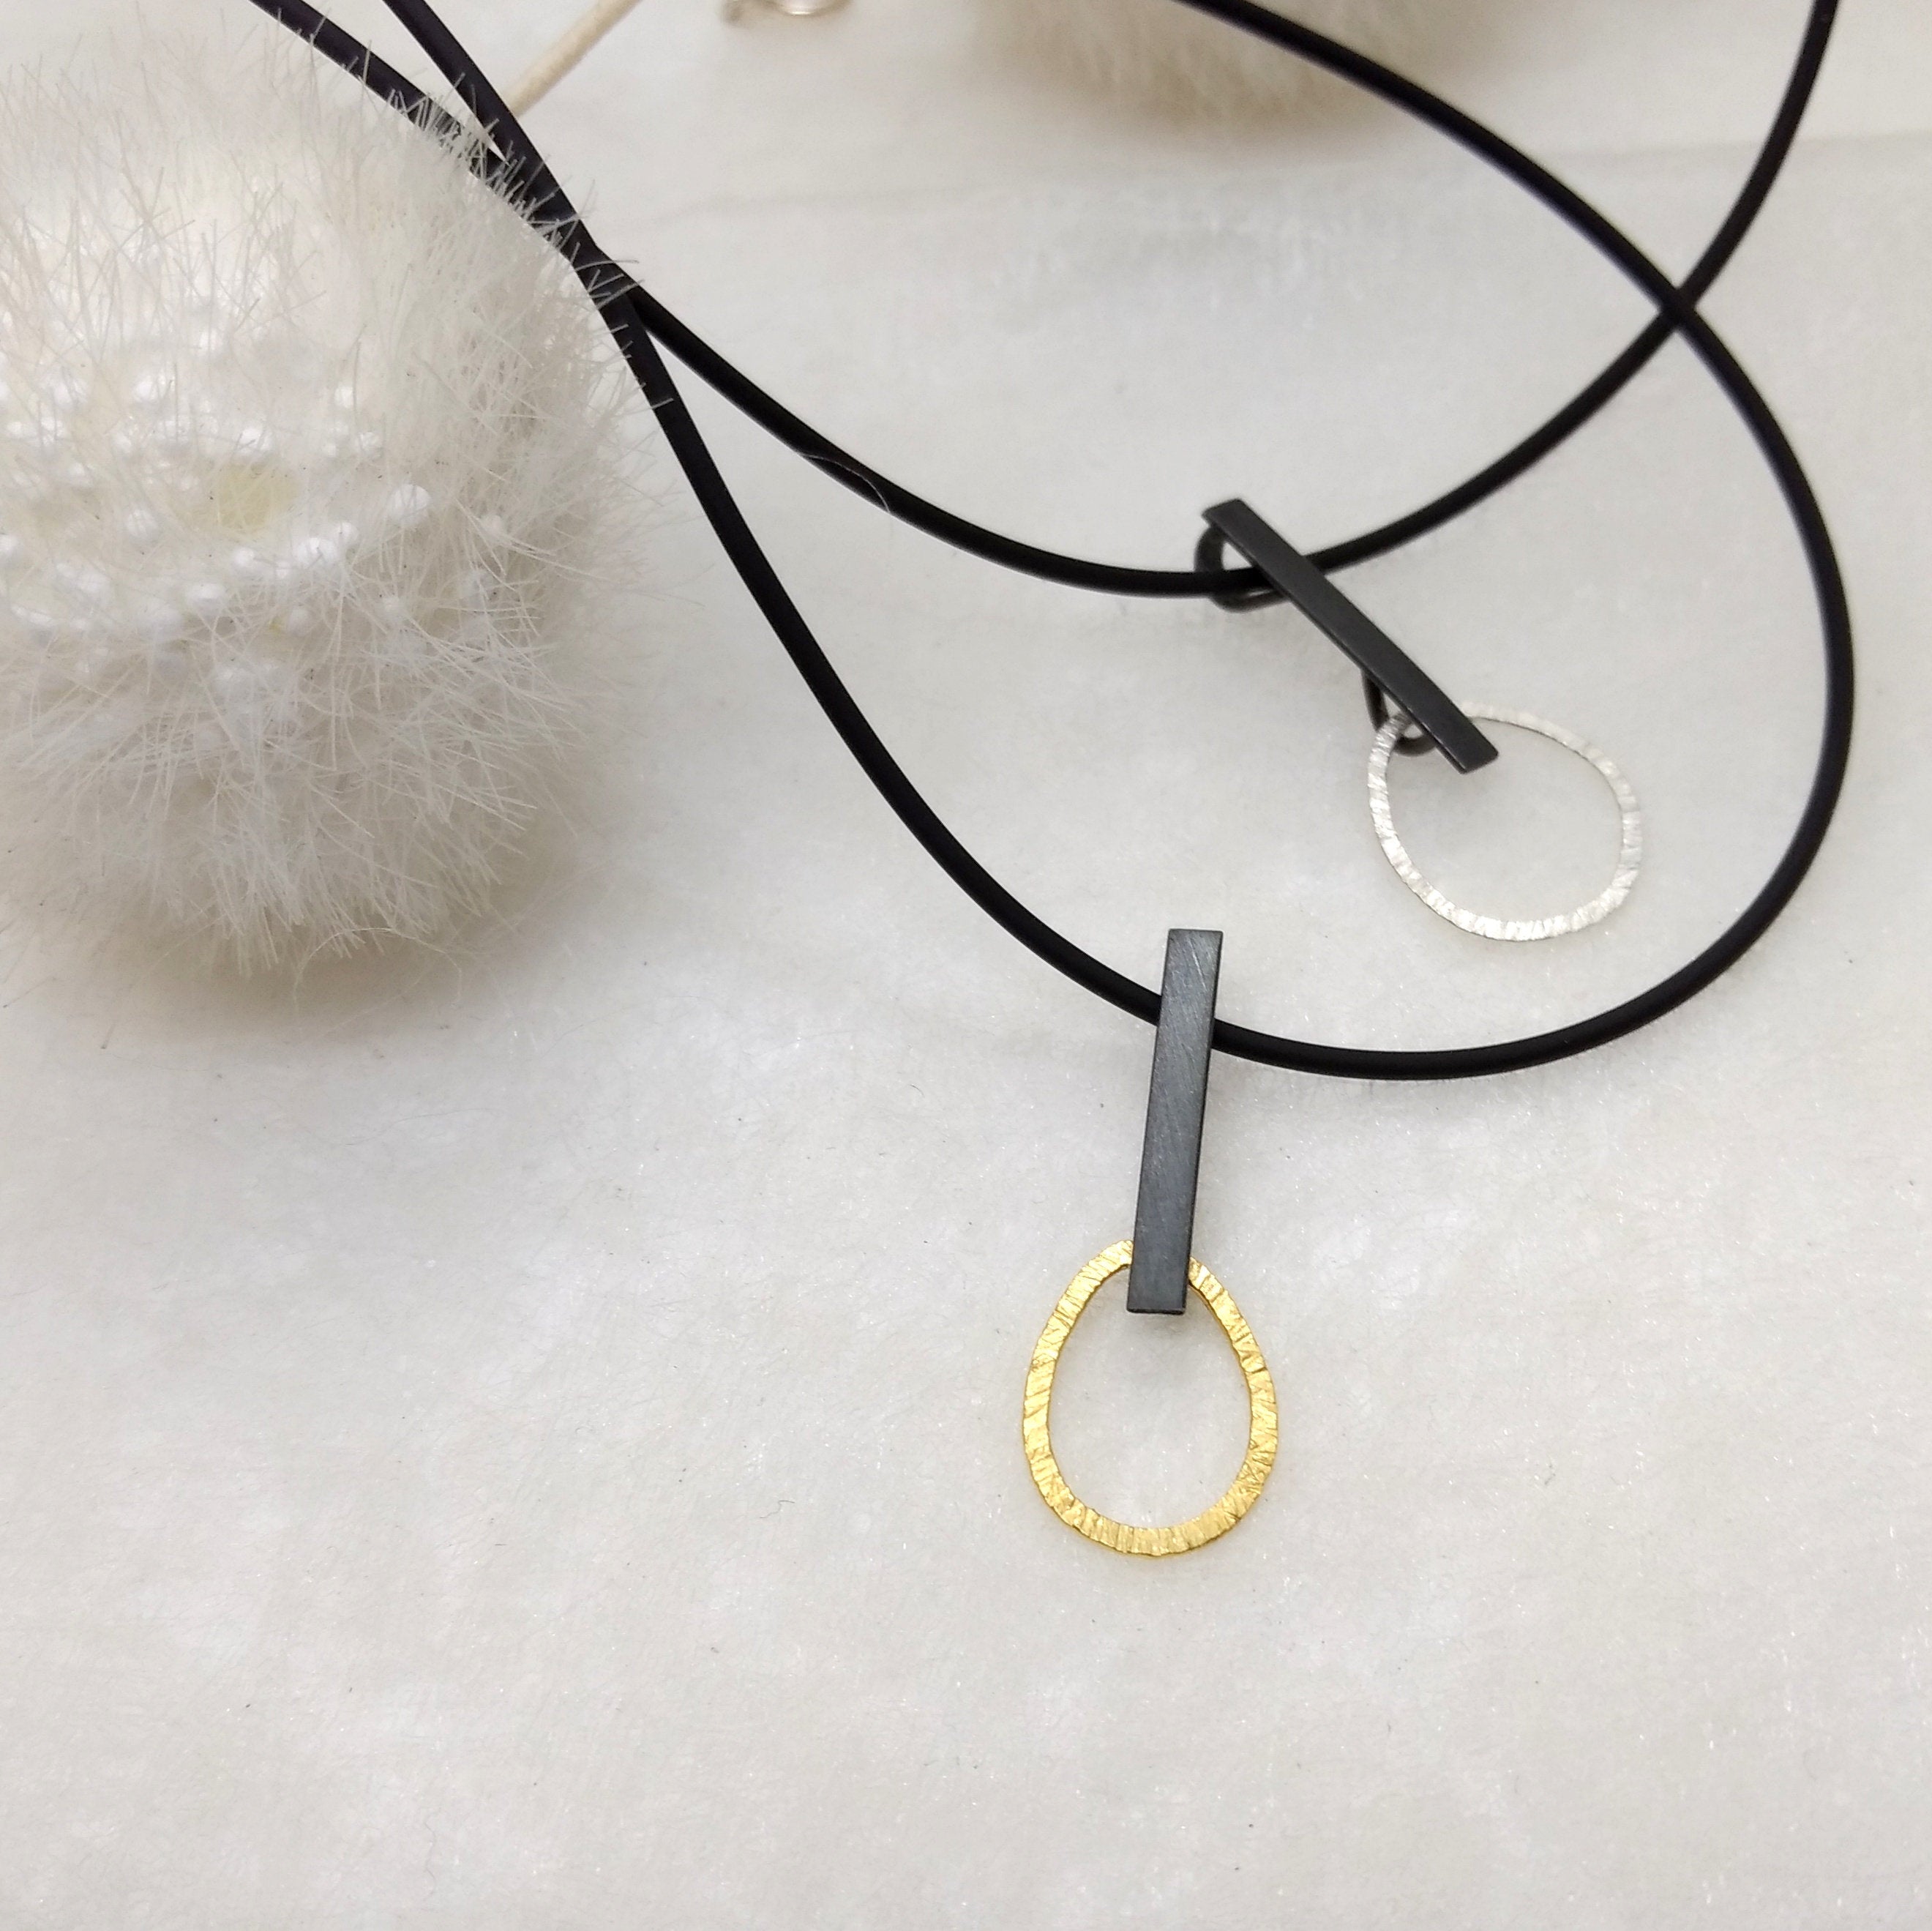 Ai-Ek, small handmade sterling silver pendant in black & white or black & gold combinations